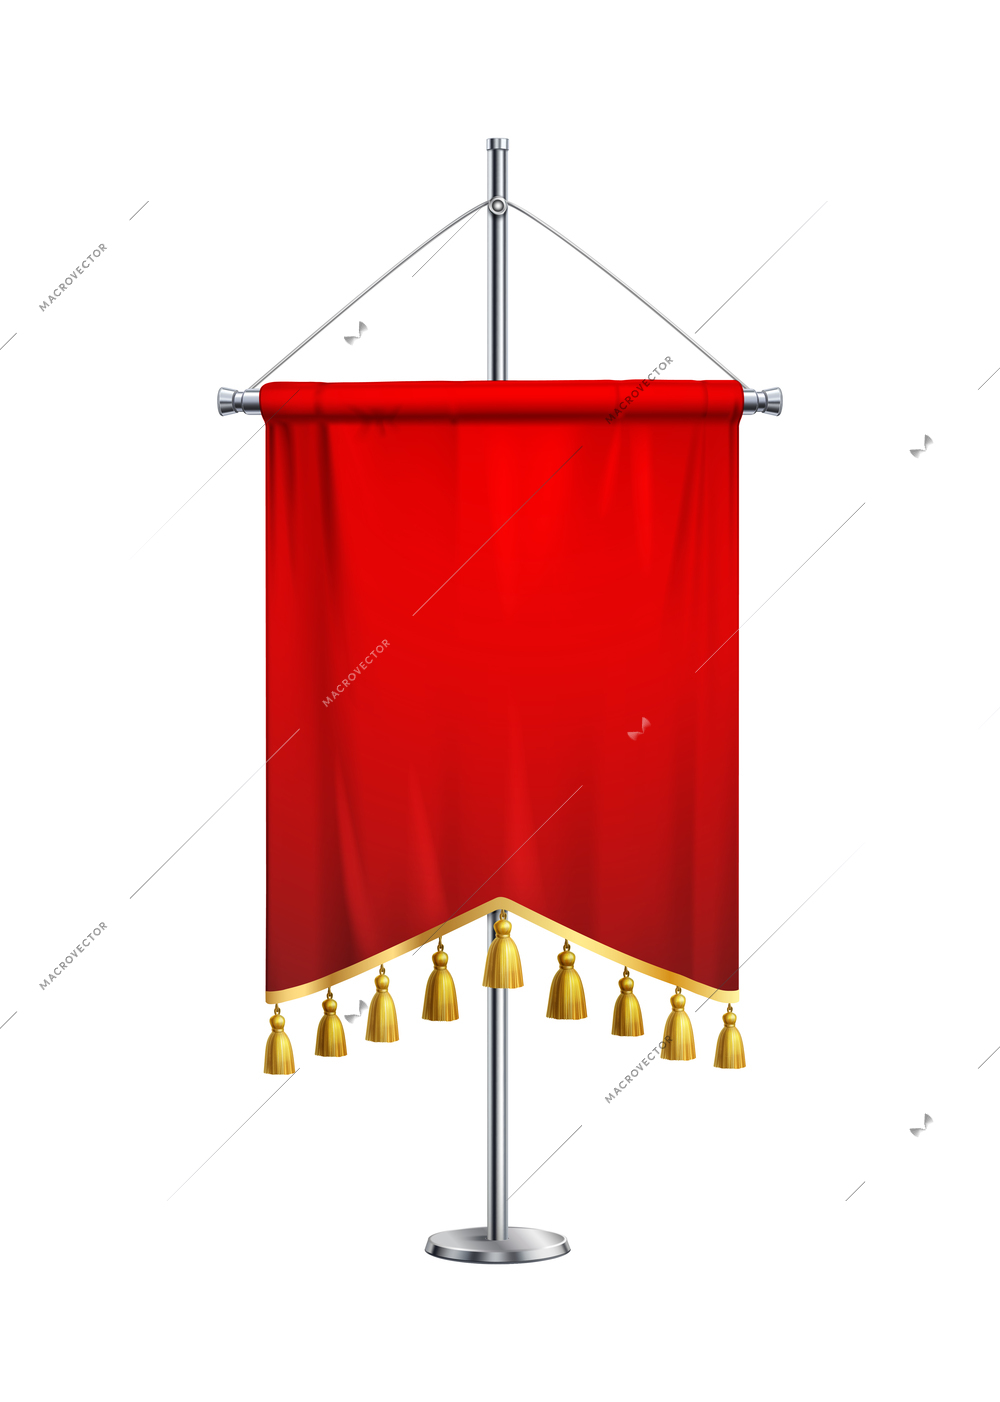 Realistic red fabric pennant with golden tassels on steel spire pedestal vector illustration